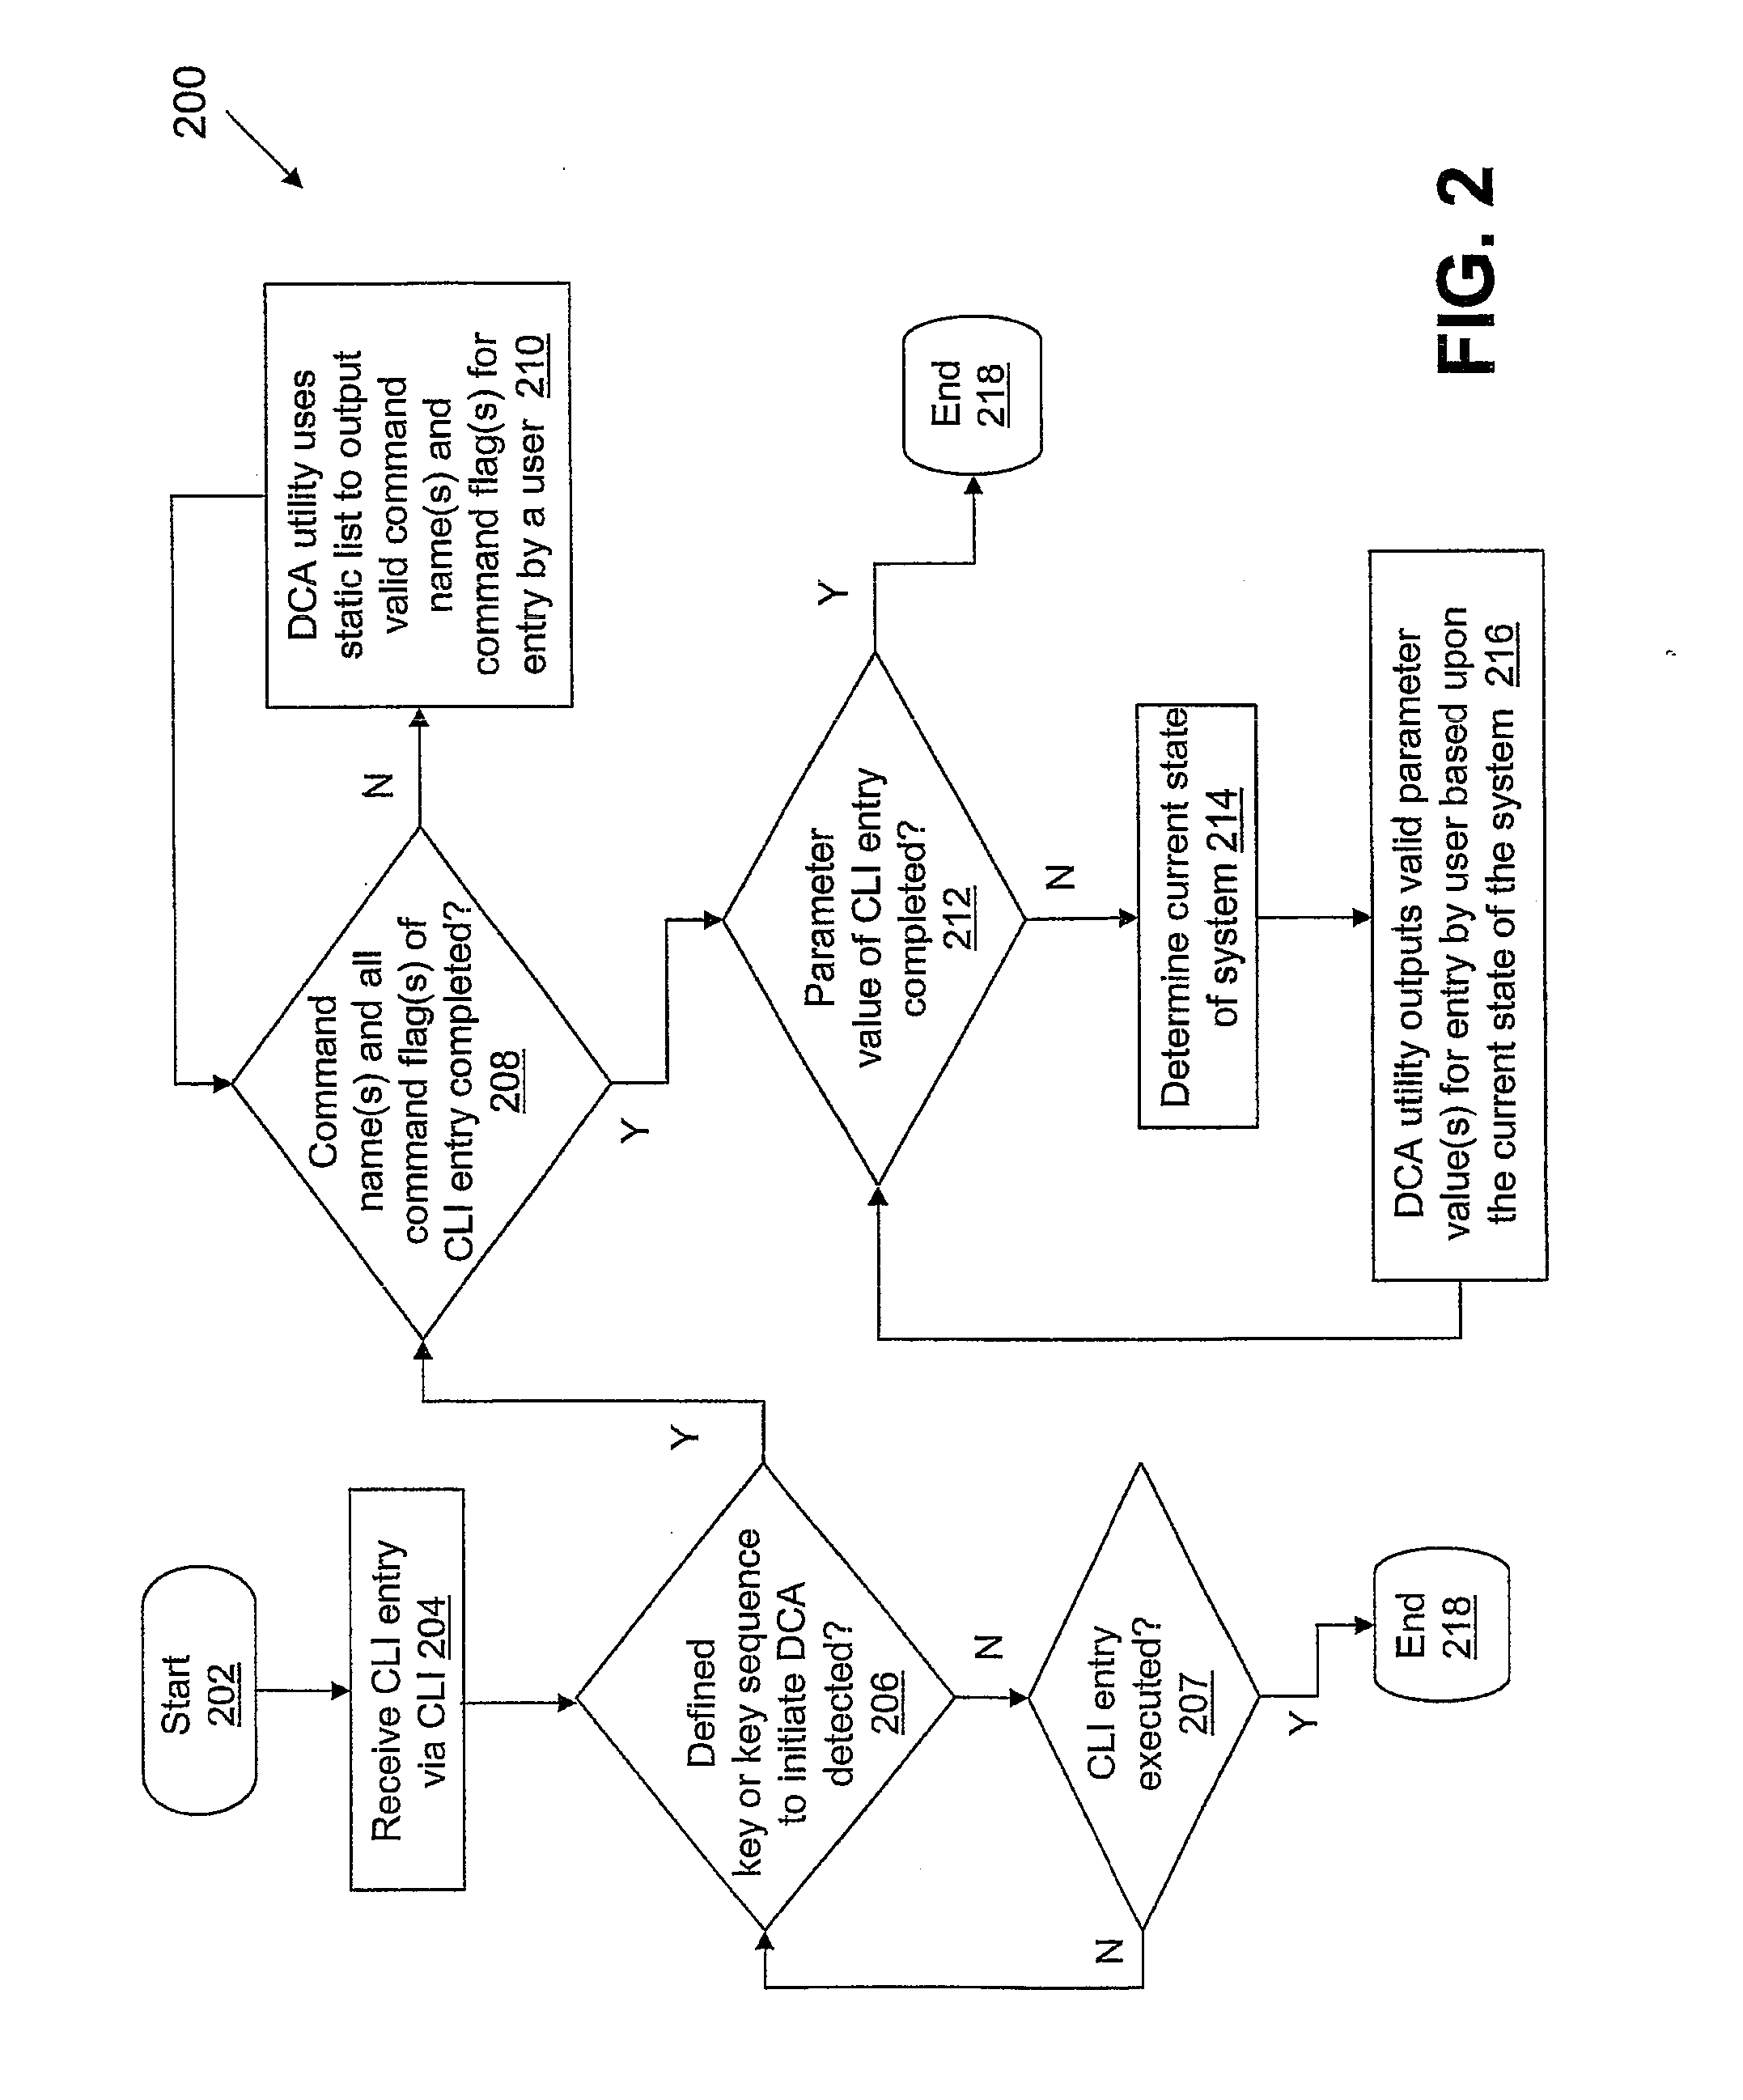 Method and system for providing dynamic context assist for a command line interface